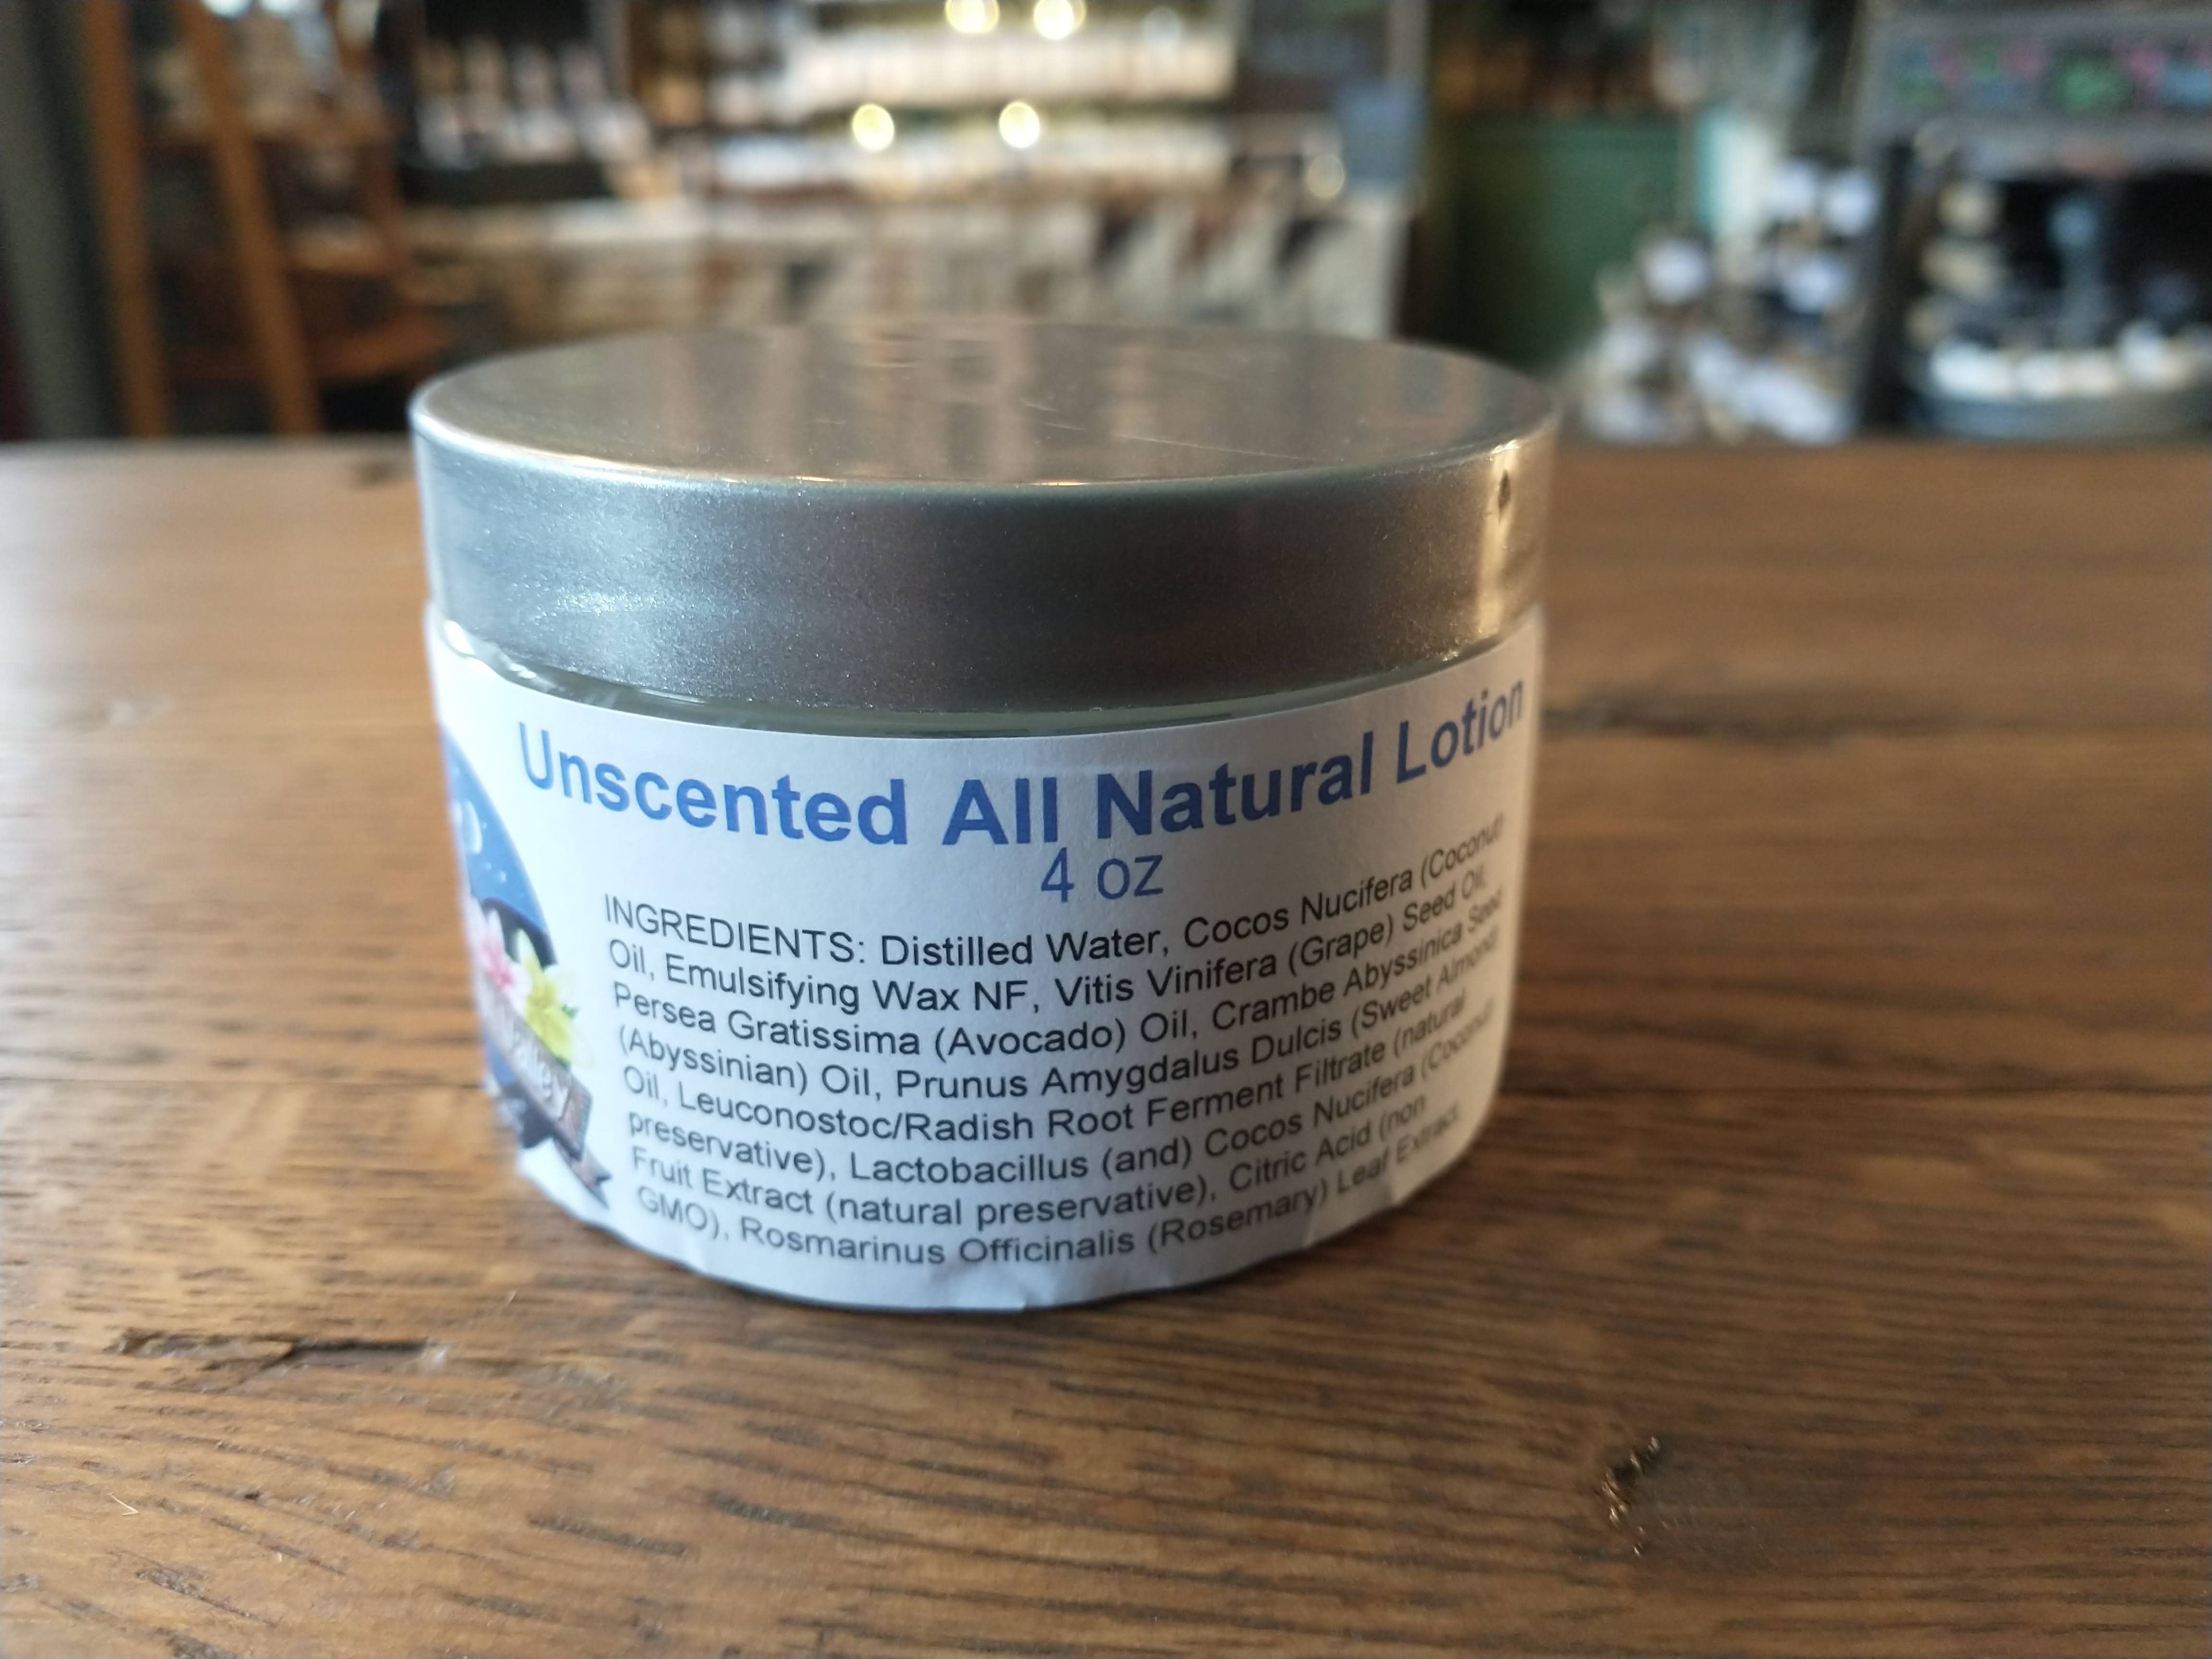 Unscented All Natural Lotion